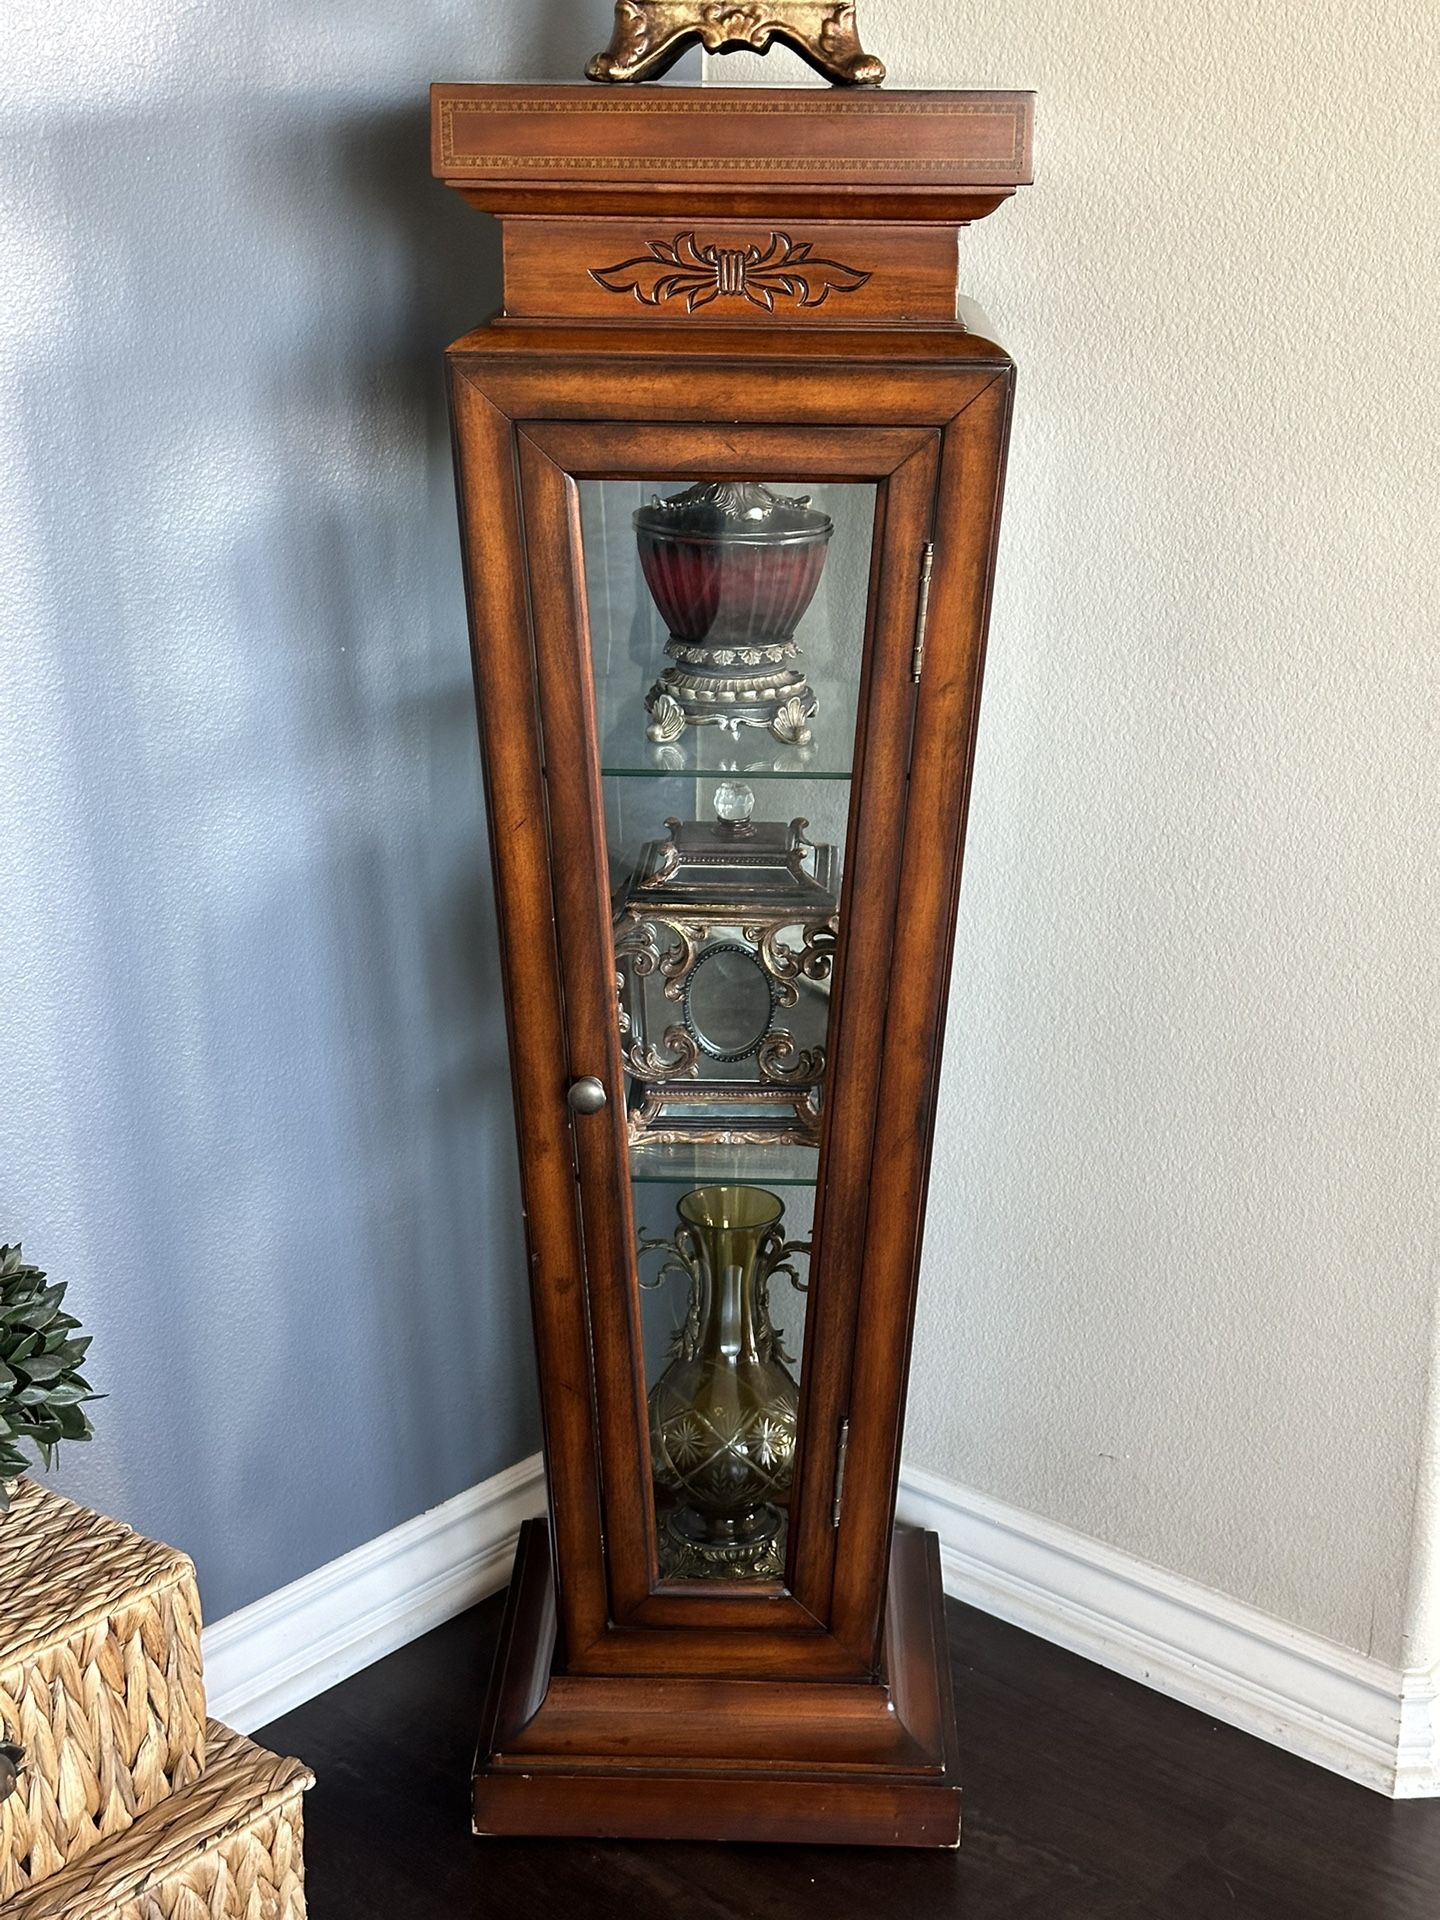 Curio cabinet, mahogany wood with glass shelves